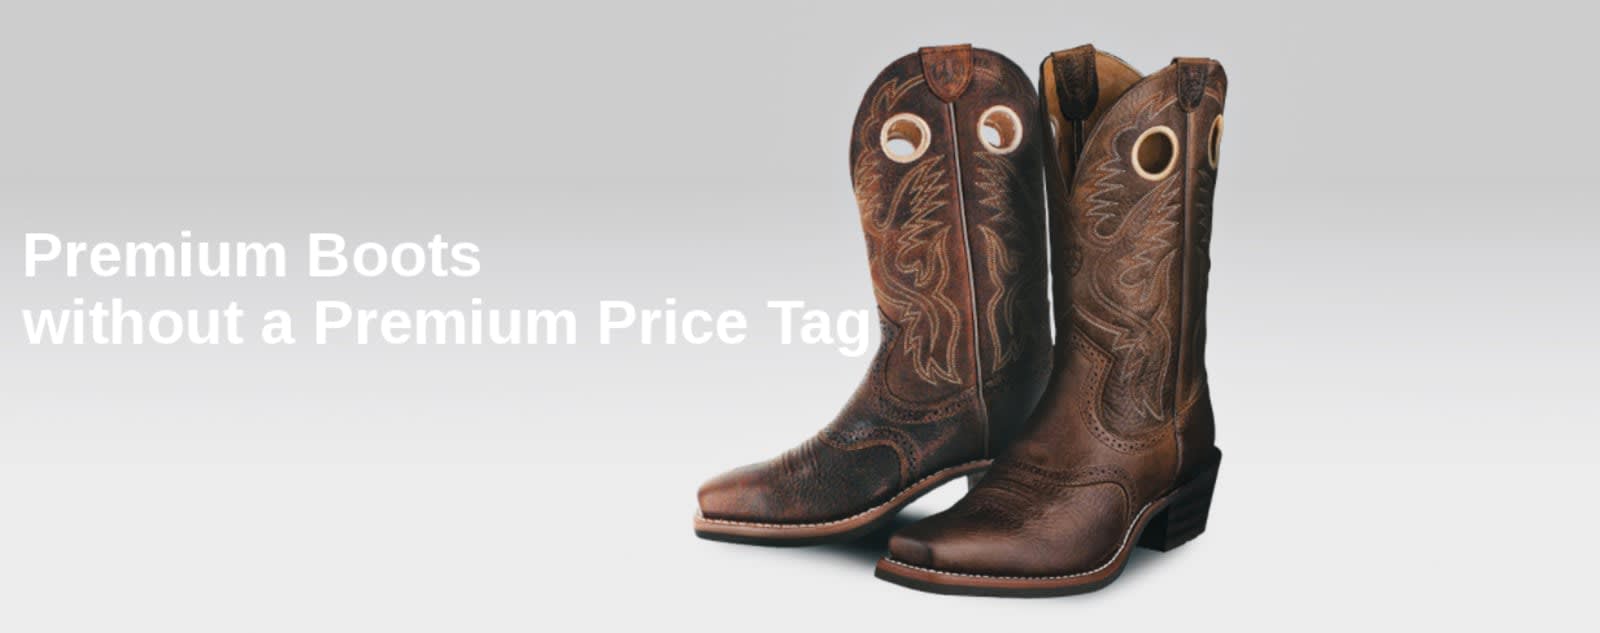 Cowtown Boots - Premium Boots at a great price